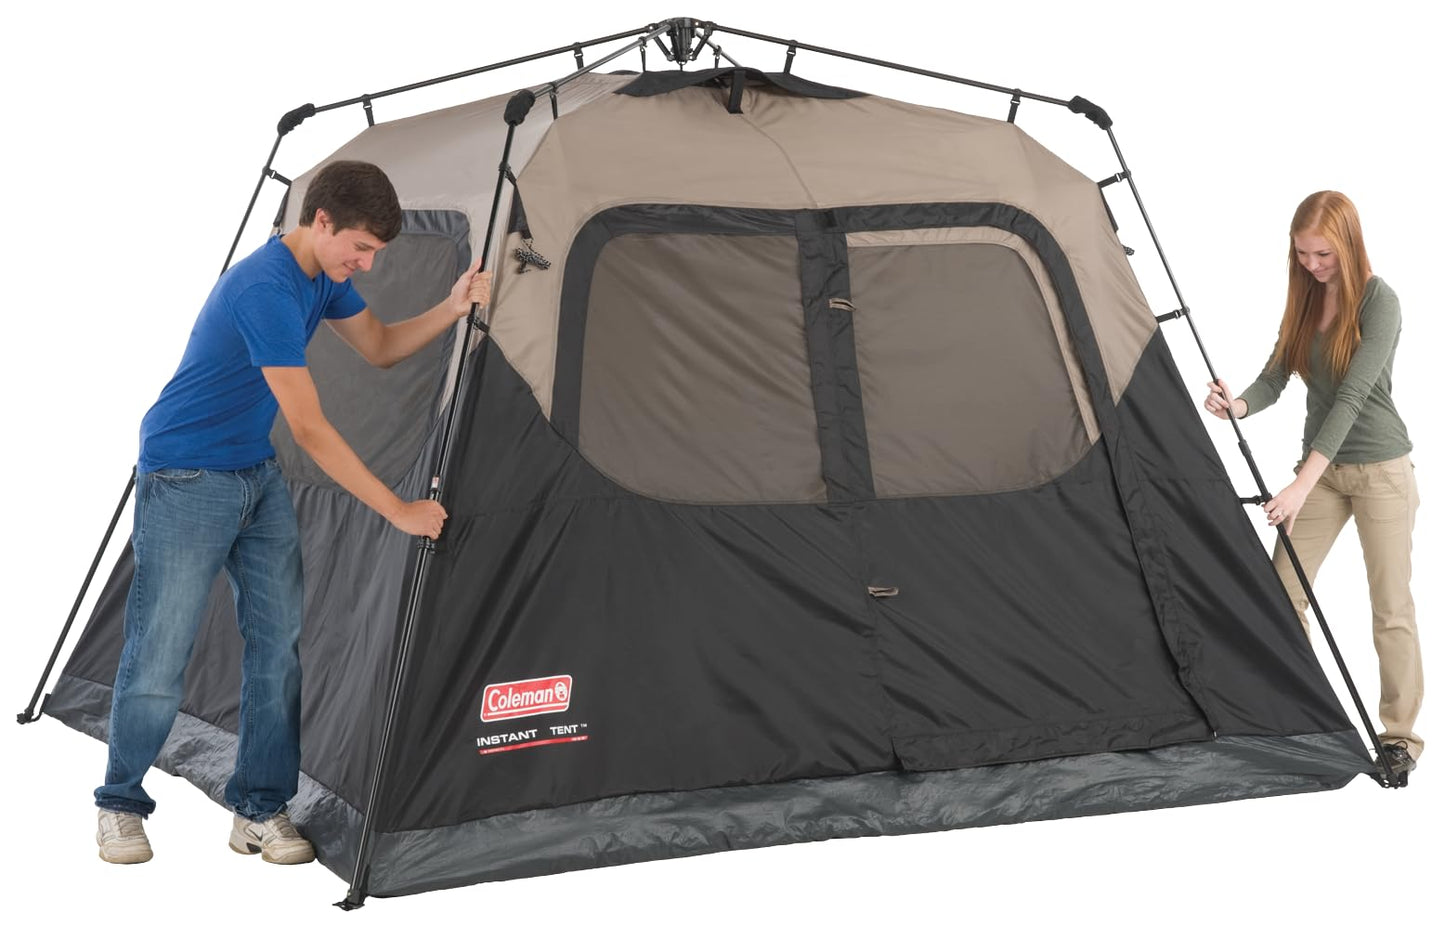 Coleman Weathertec Instant Camping Tent - Available in 4/6/8/10 Person Sizes